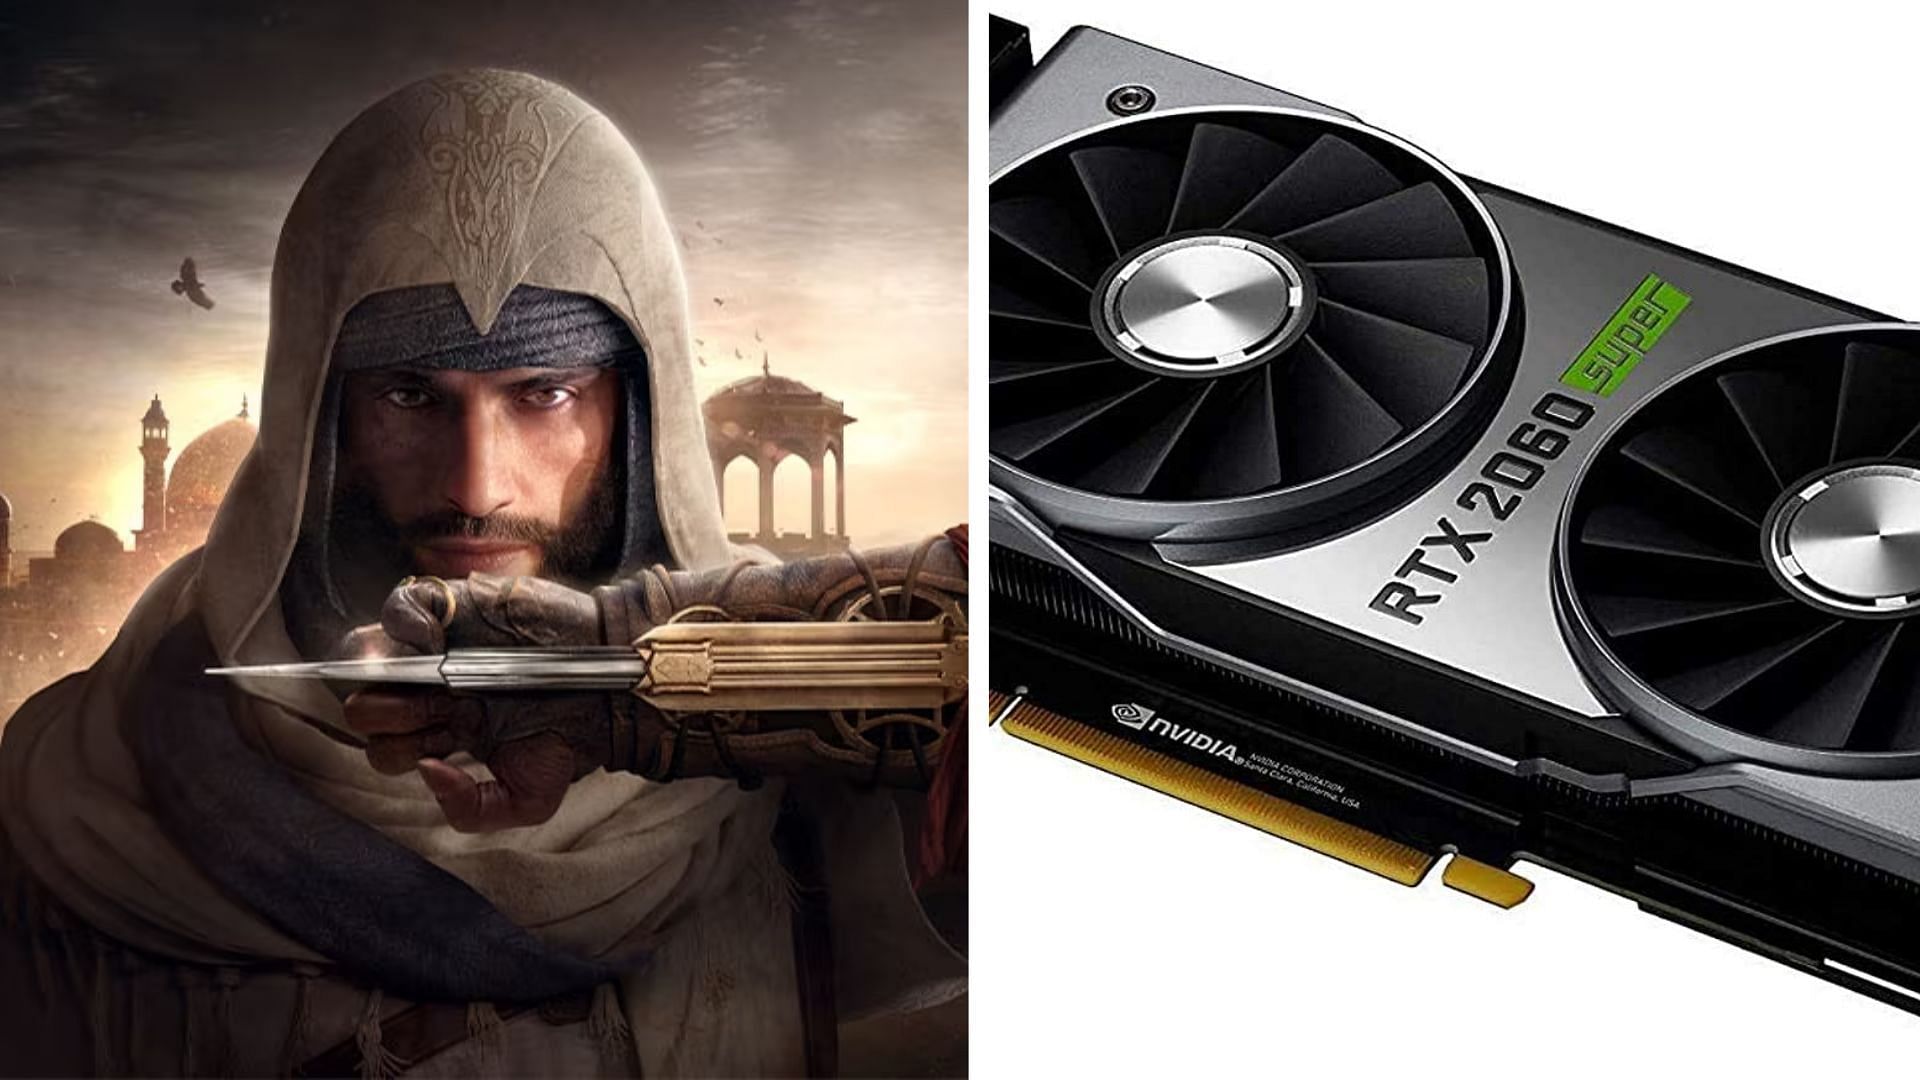 The Nvidia RTX 2060 and 2060 Super can handle Assassin